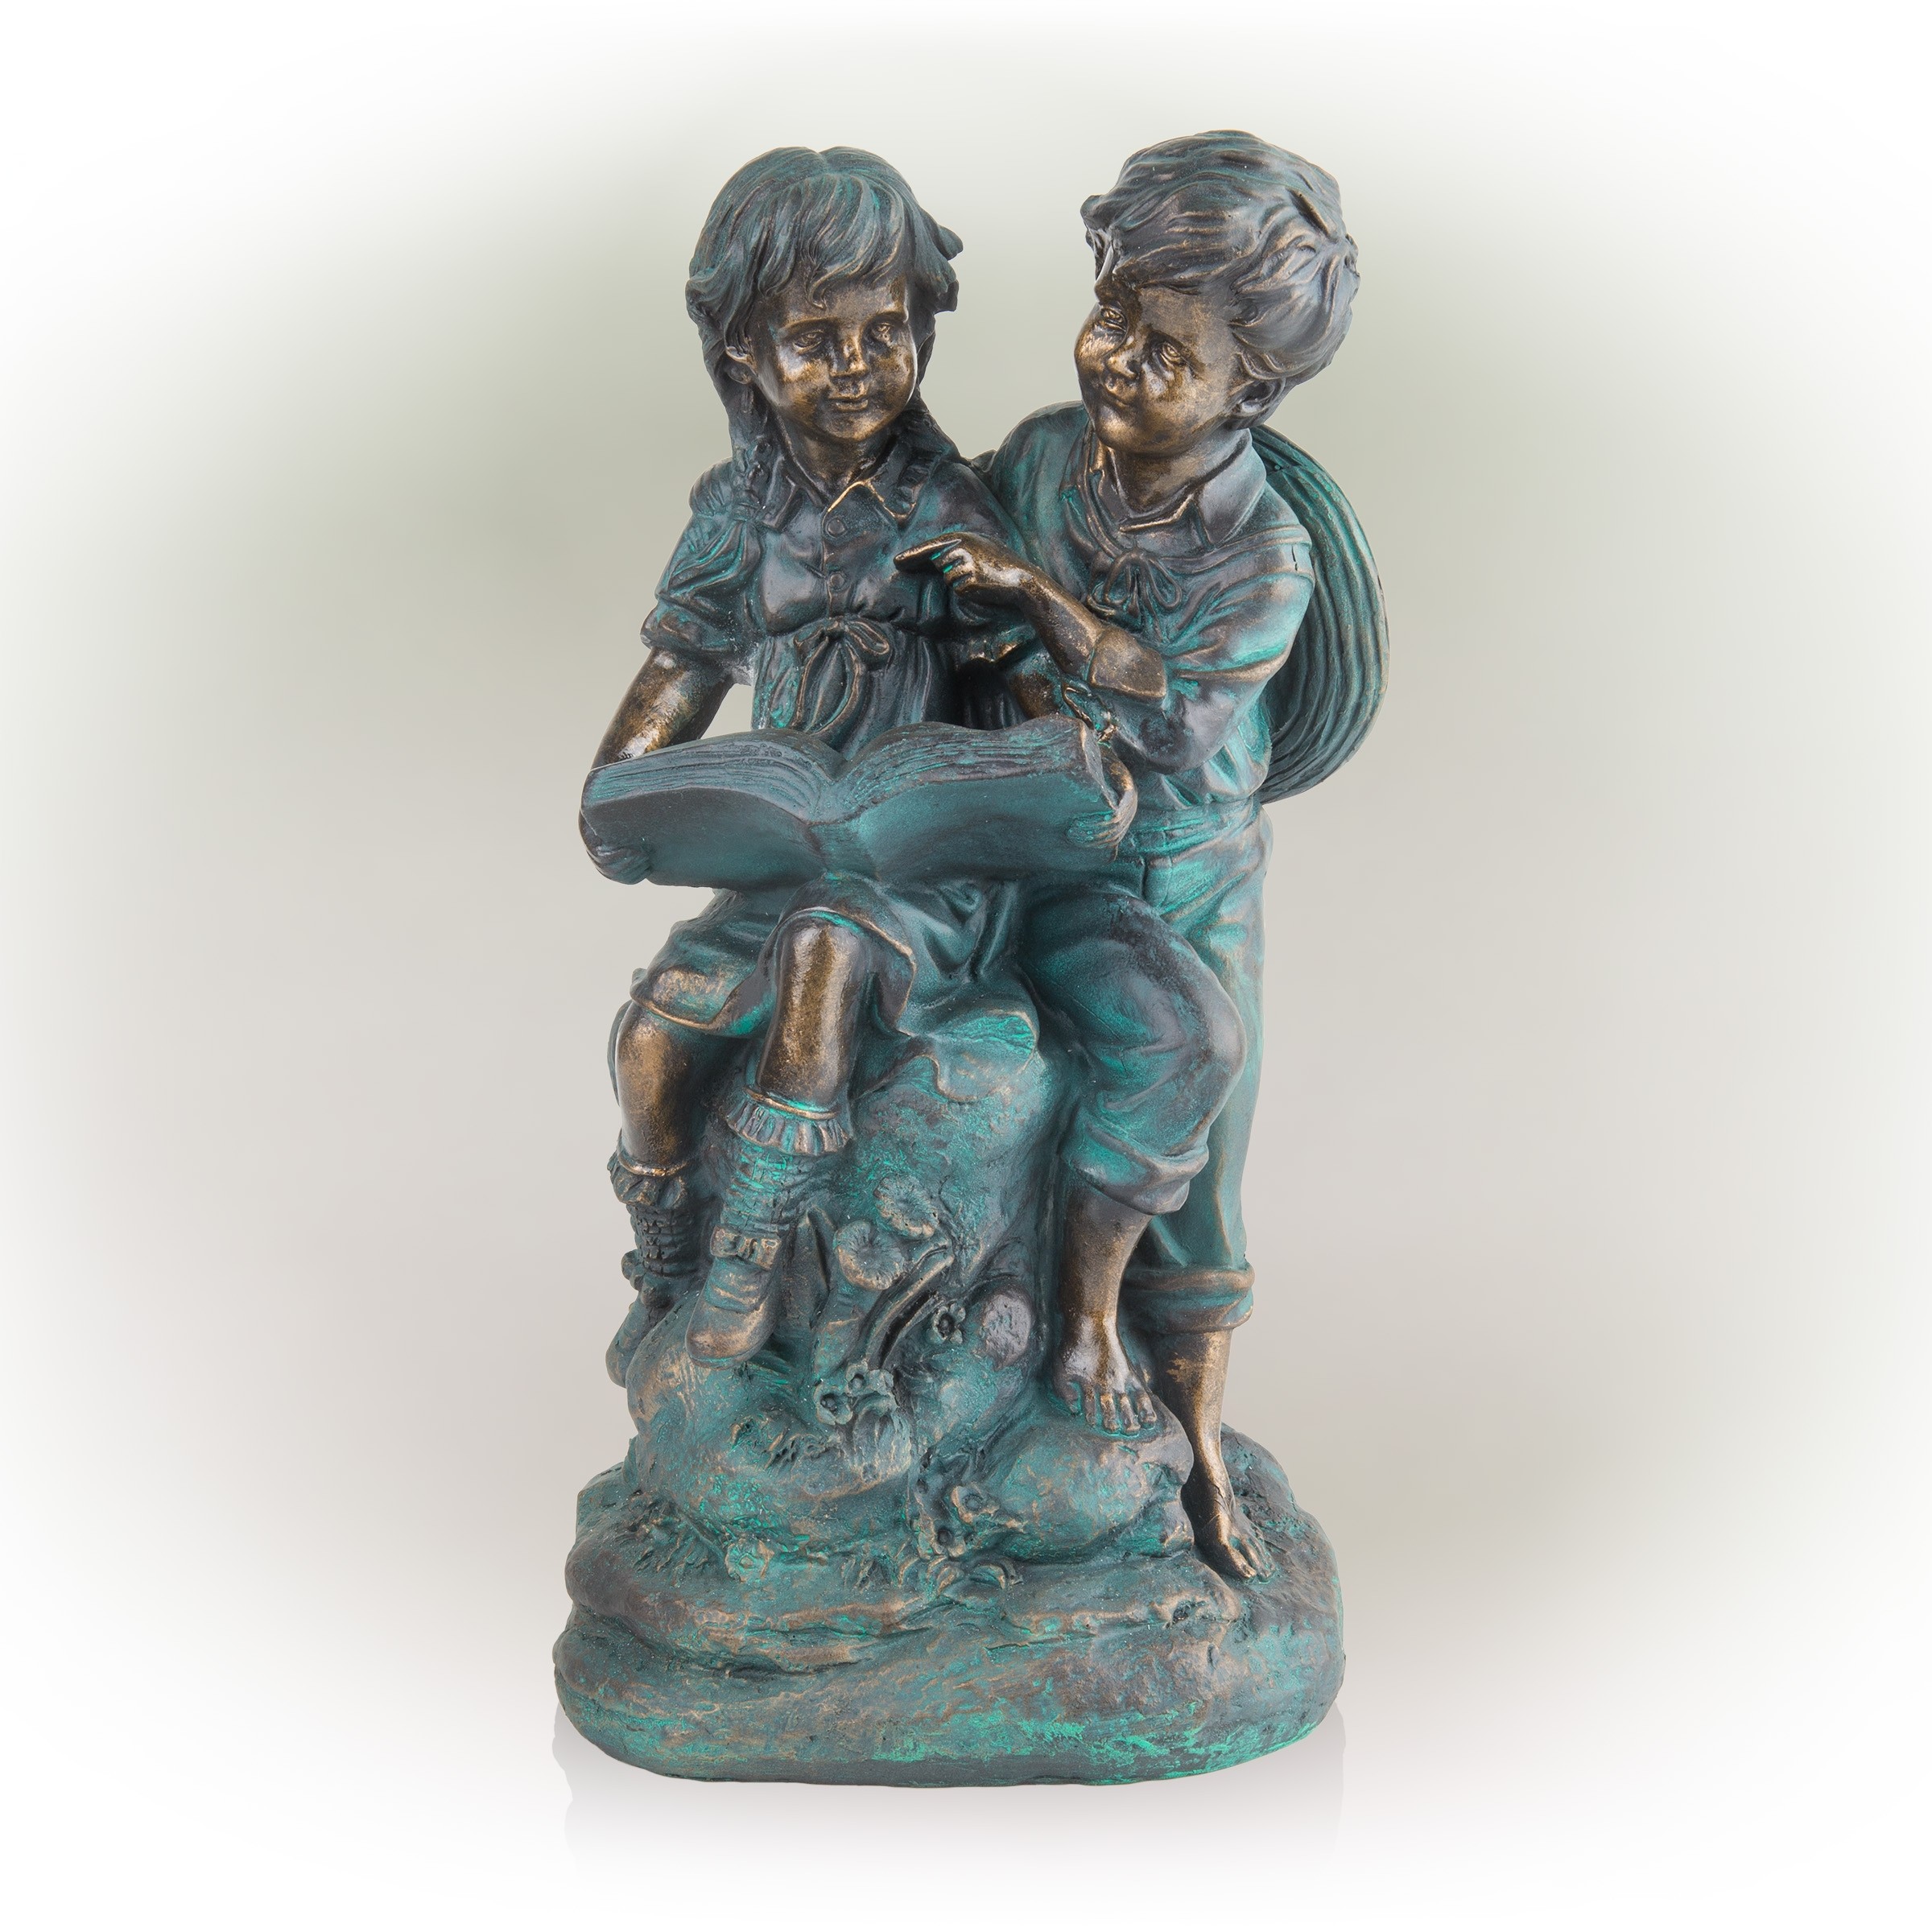 16" Tall Girl and Boy Reading Together Statue